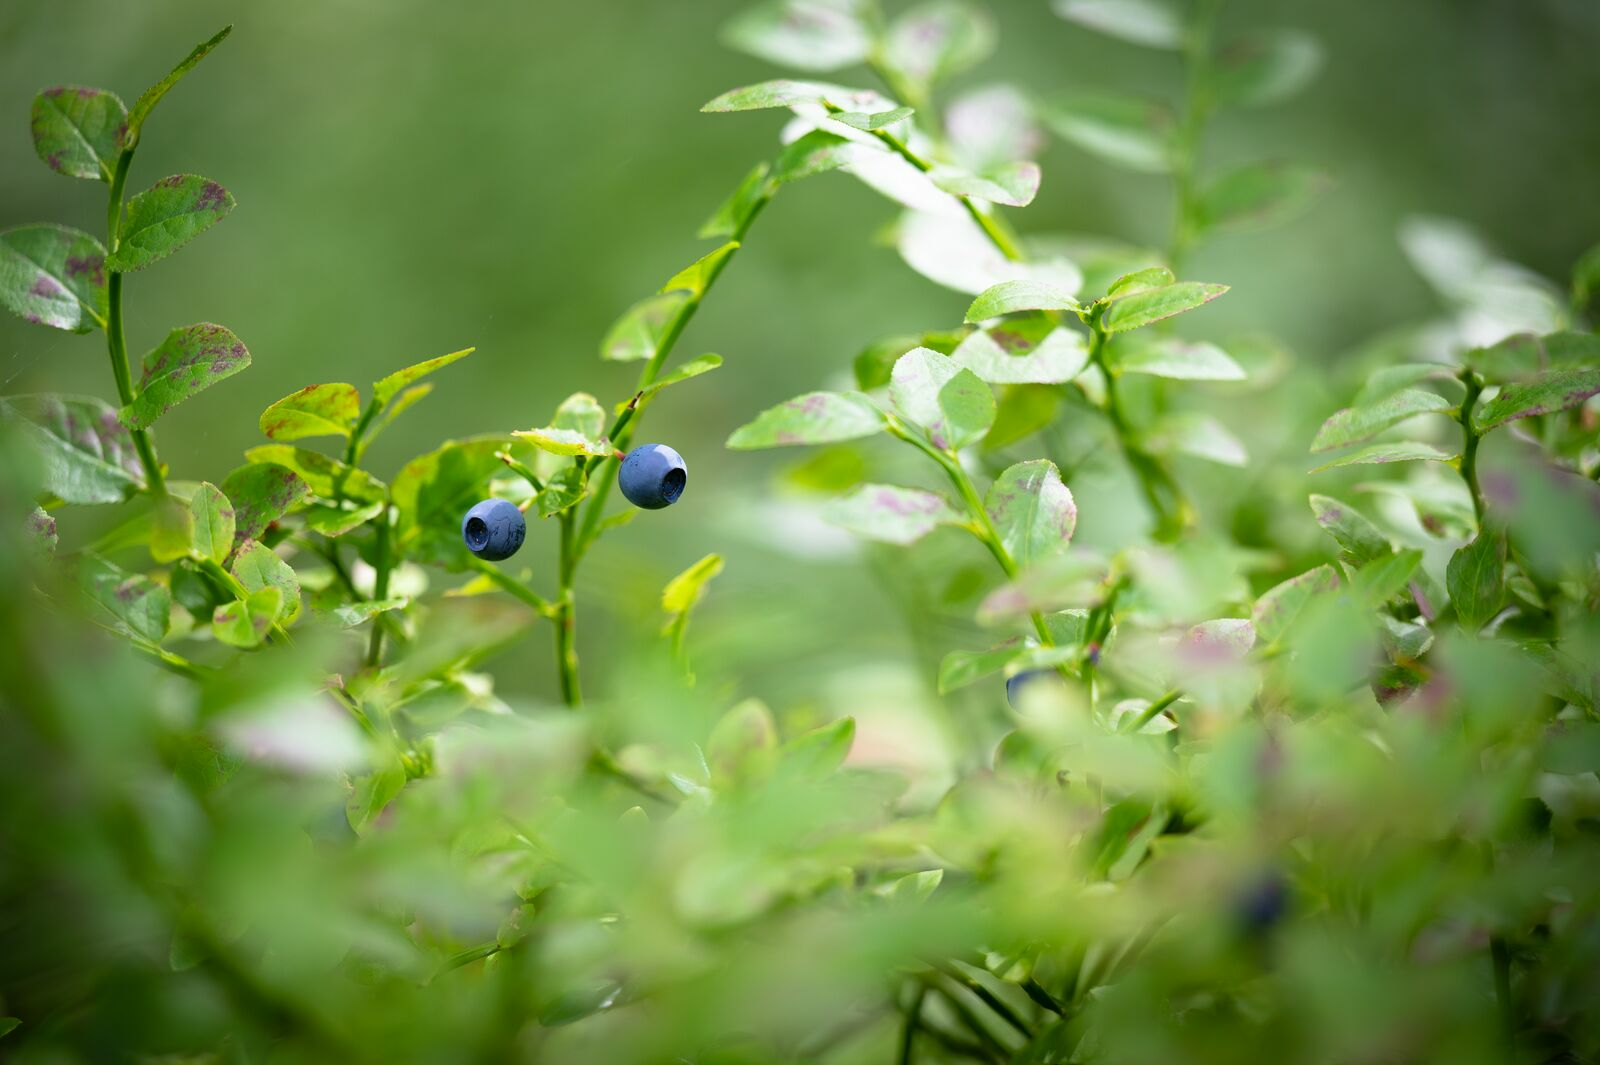 Pruning blueberries: A guide